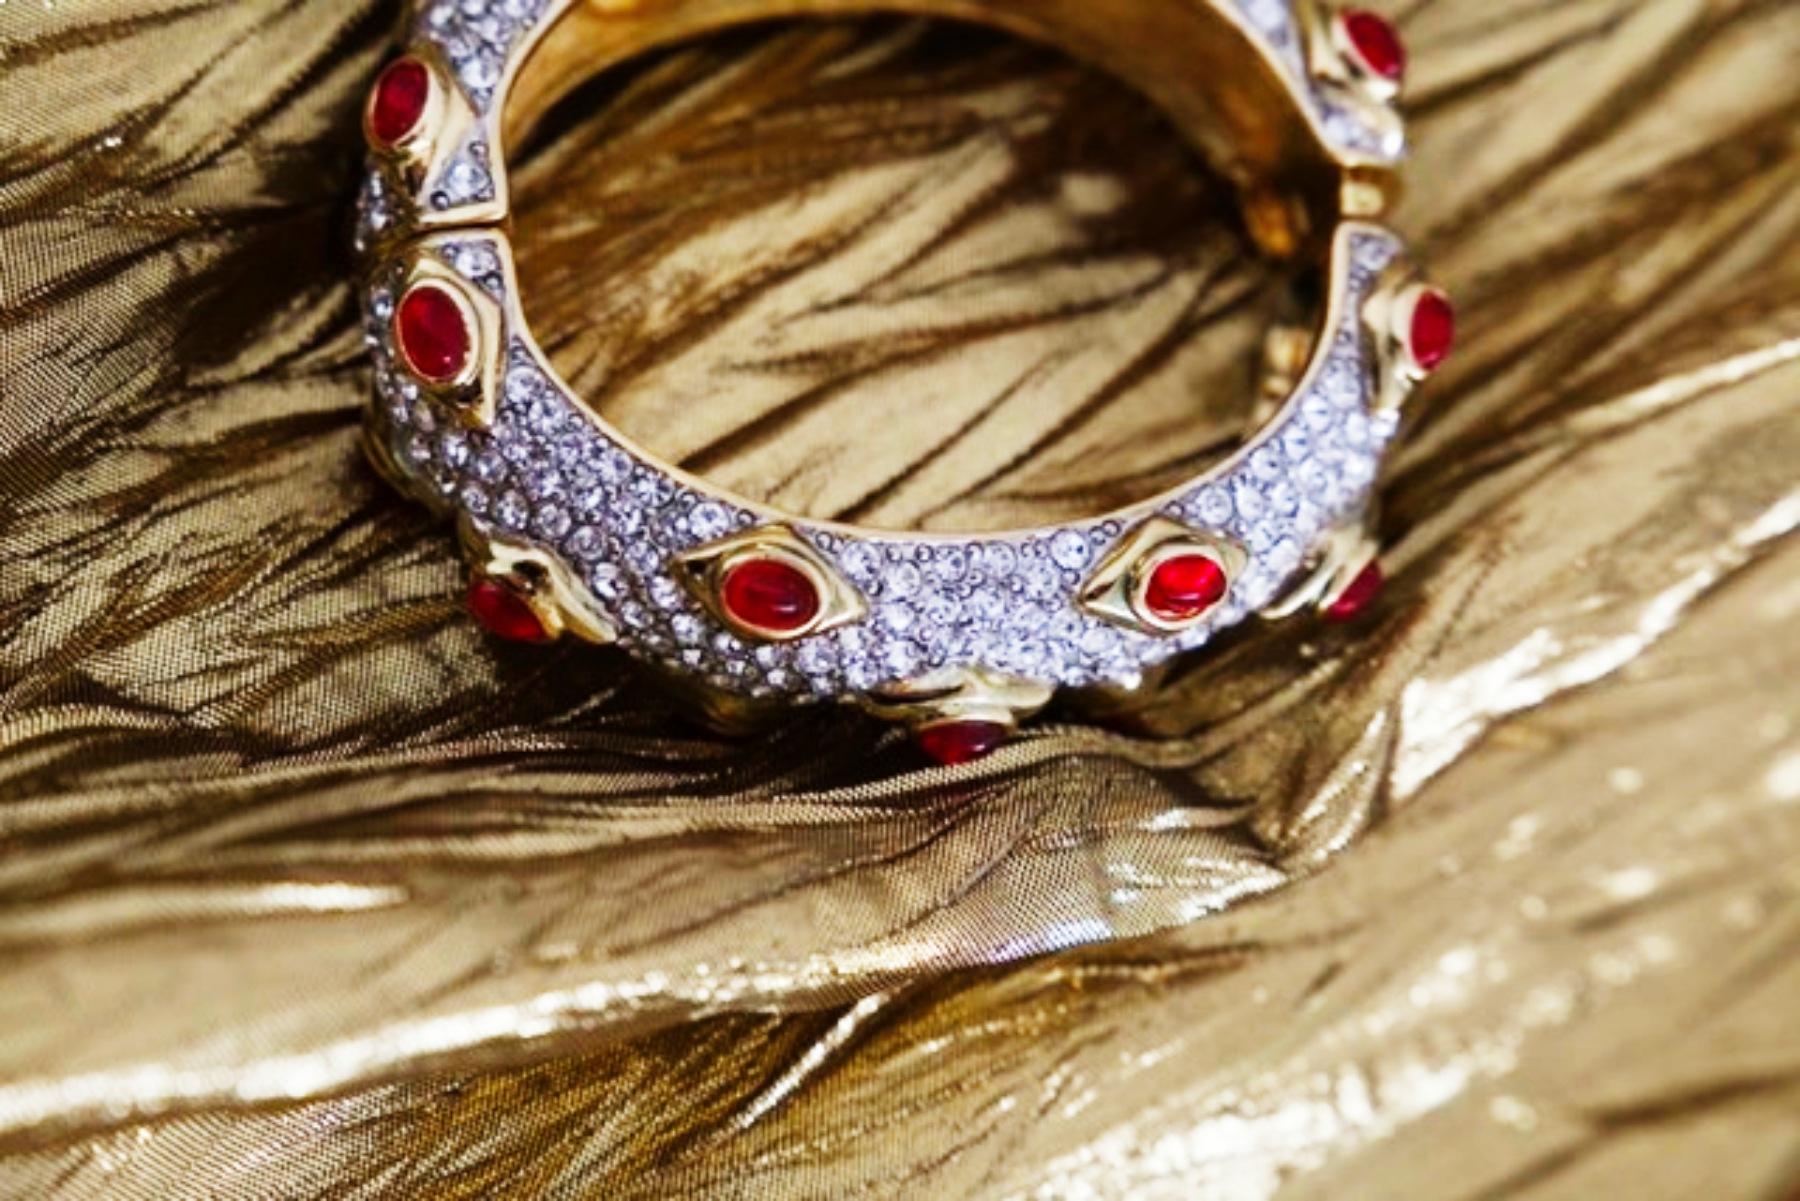 Kenneth Lane Gold Bracelet with Red Stones For Sale 6